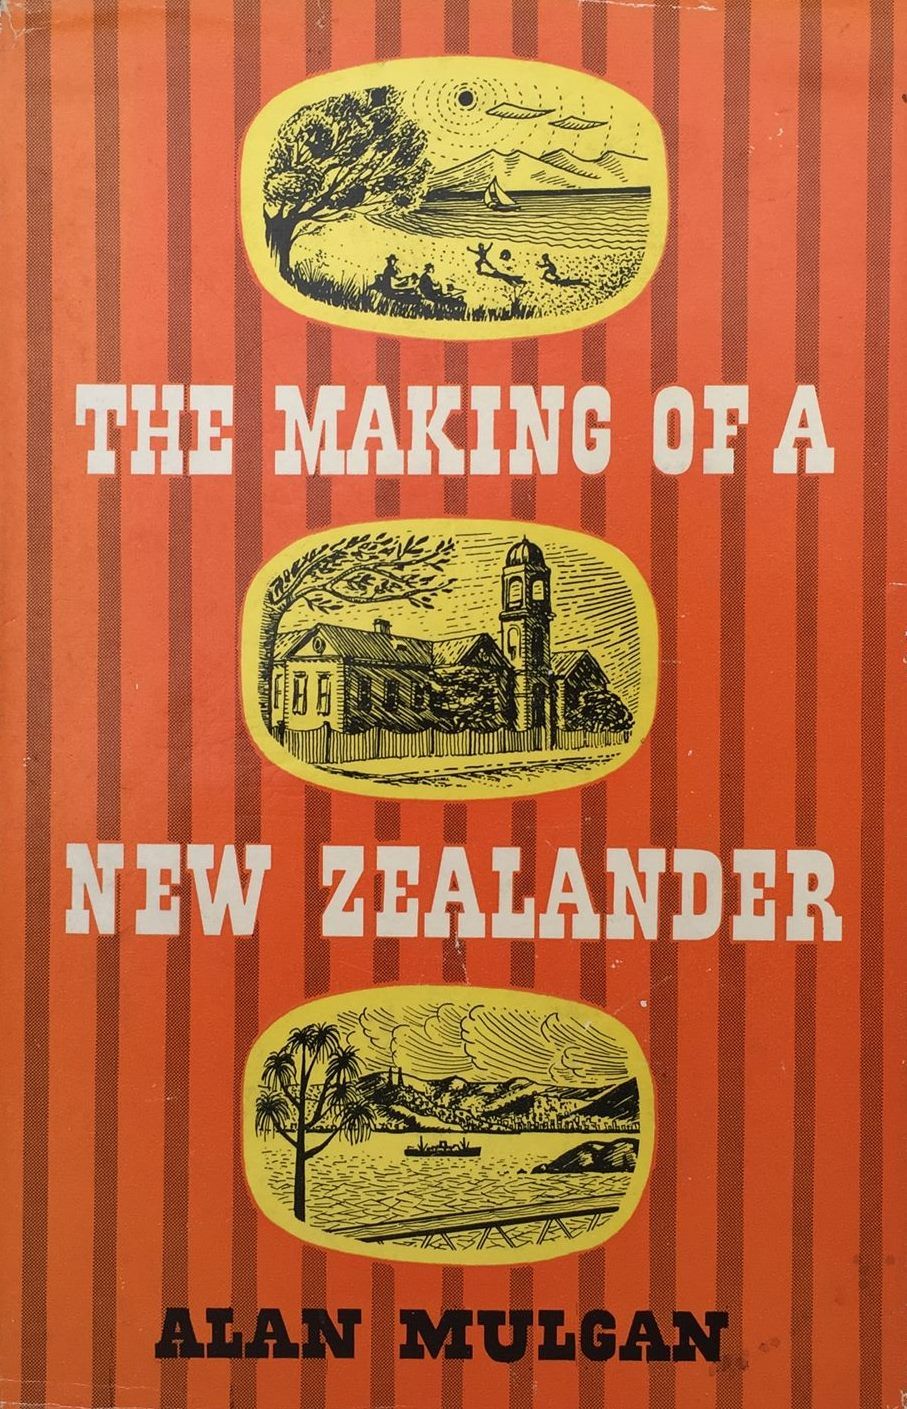 THE MAKING OF A NEW ZEALANDER